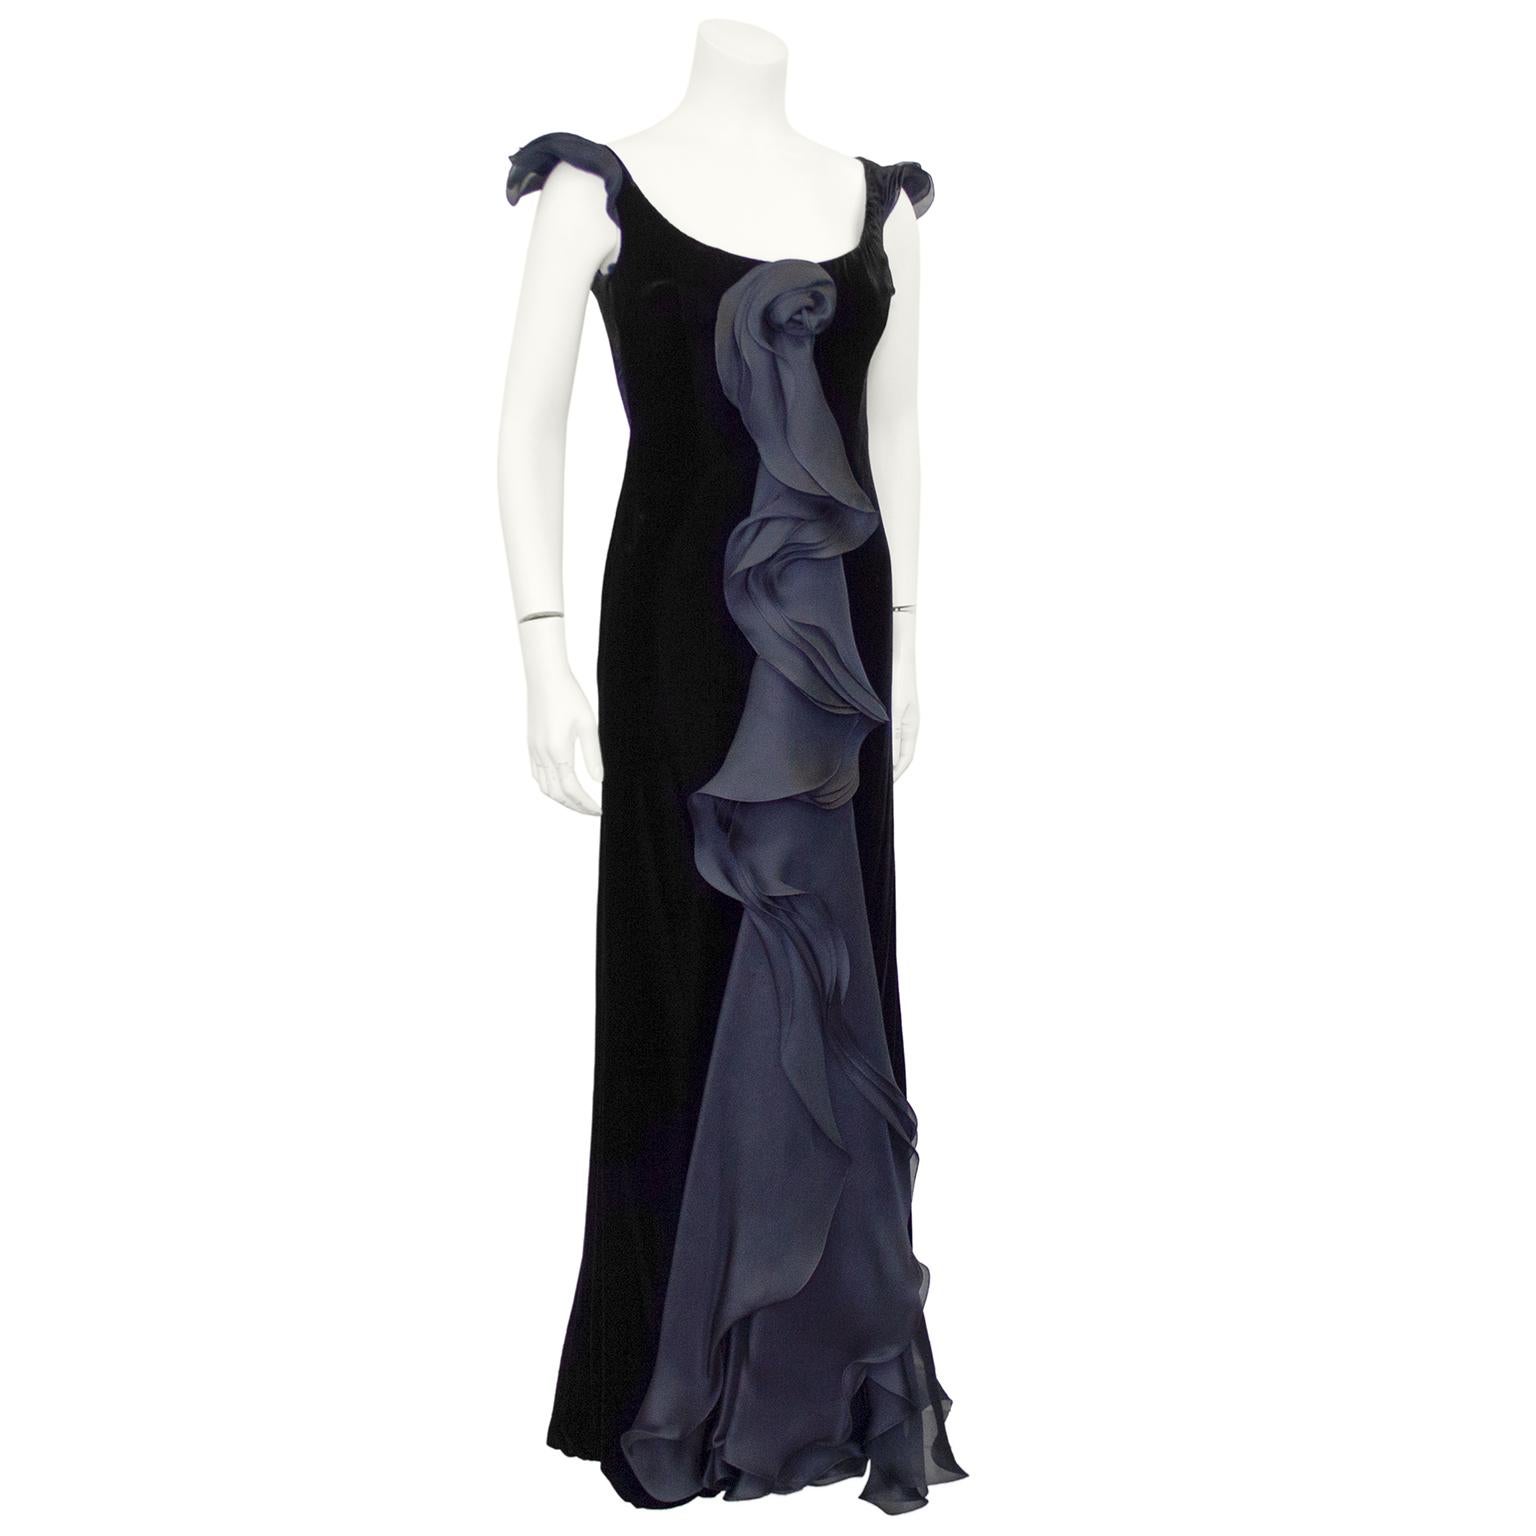 This Giorgio Armani jet black cut velvet gown from the 1990s is so gorgeous and etherial. Sleeveless with a wide scoop neckline and sheath shape. The eye-catching moment of this gown is the stunning layered and ruffled black chiffon that starts with